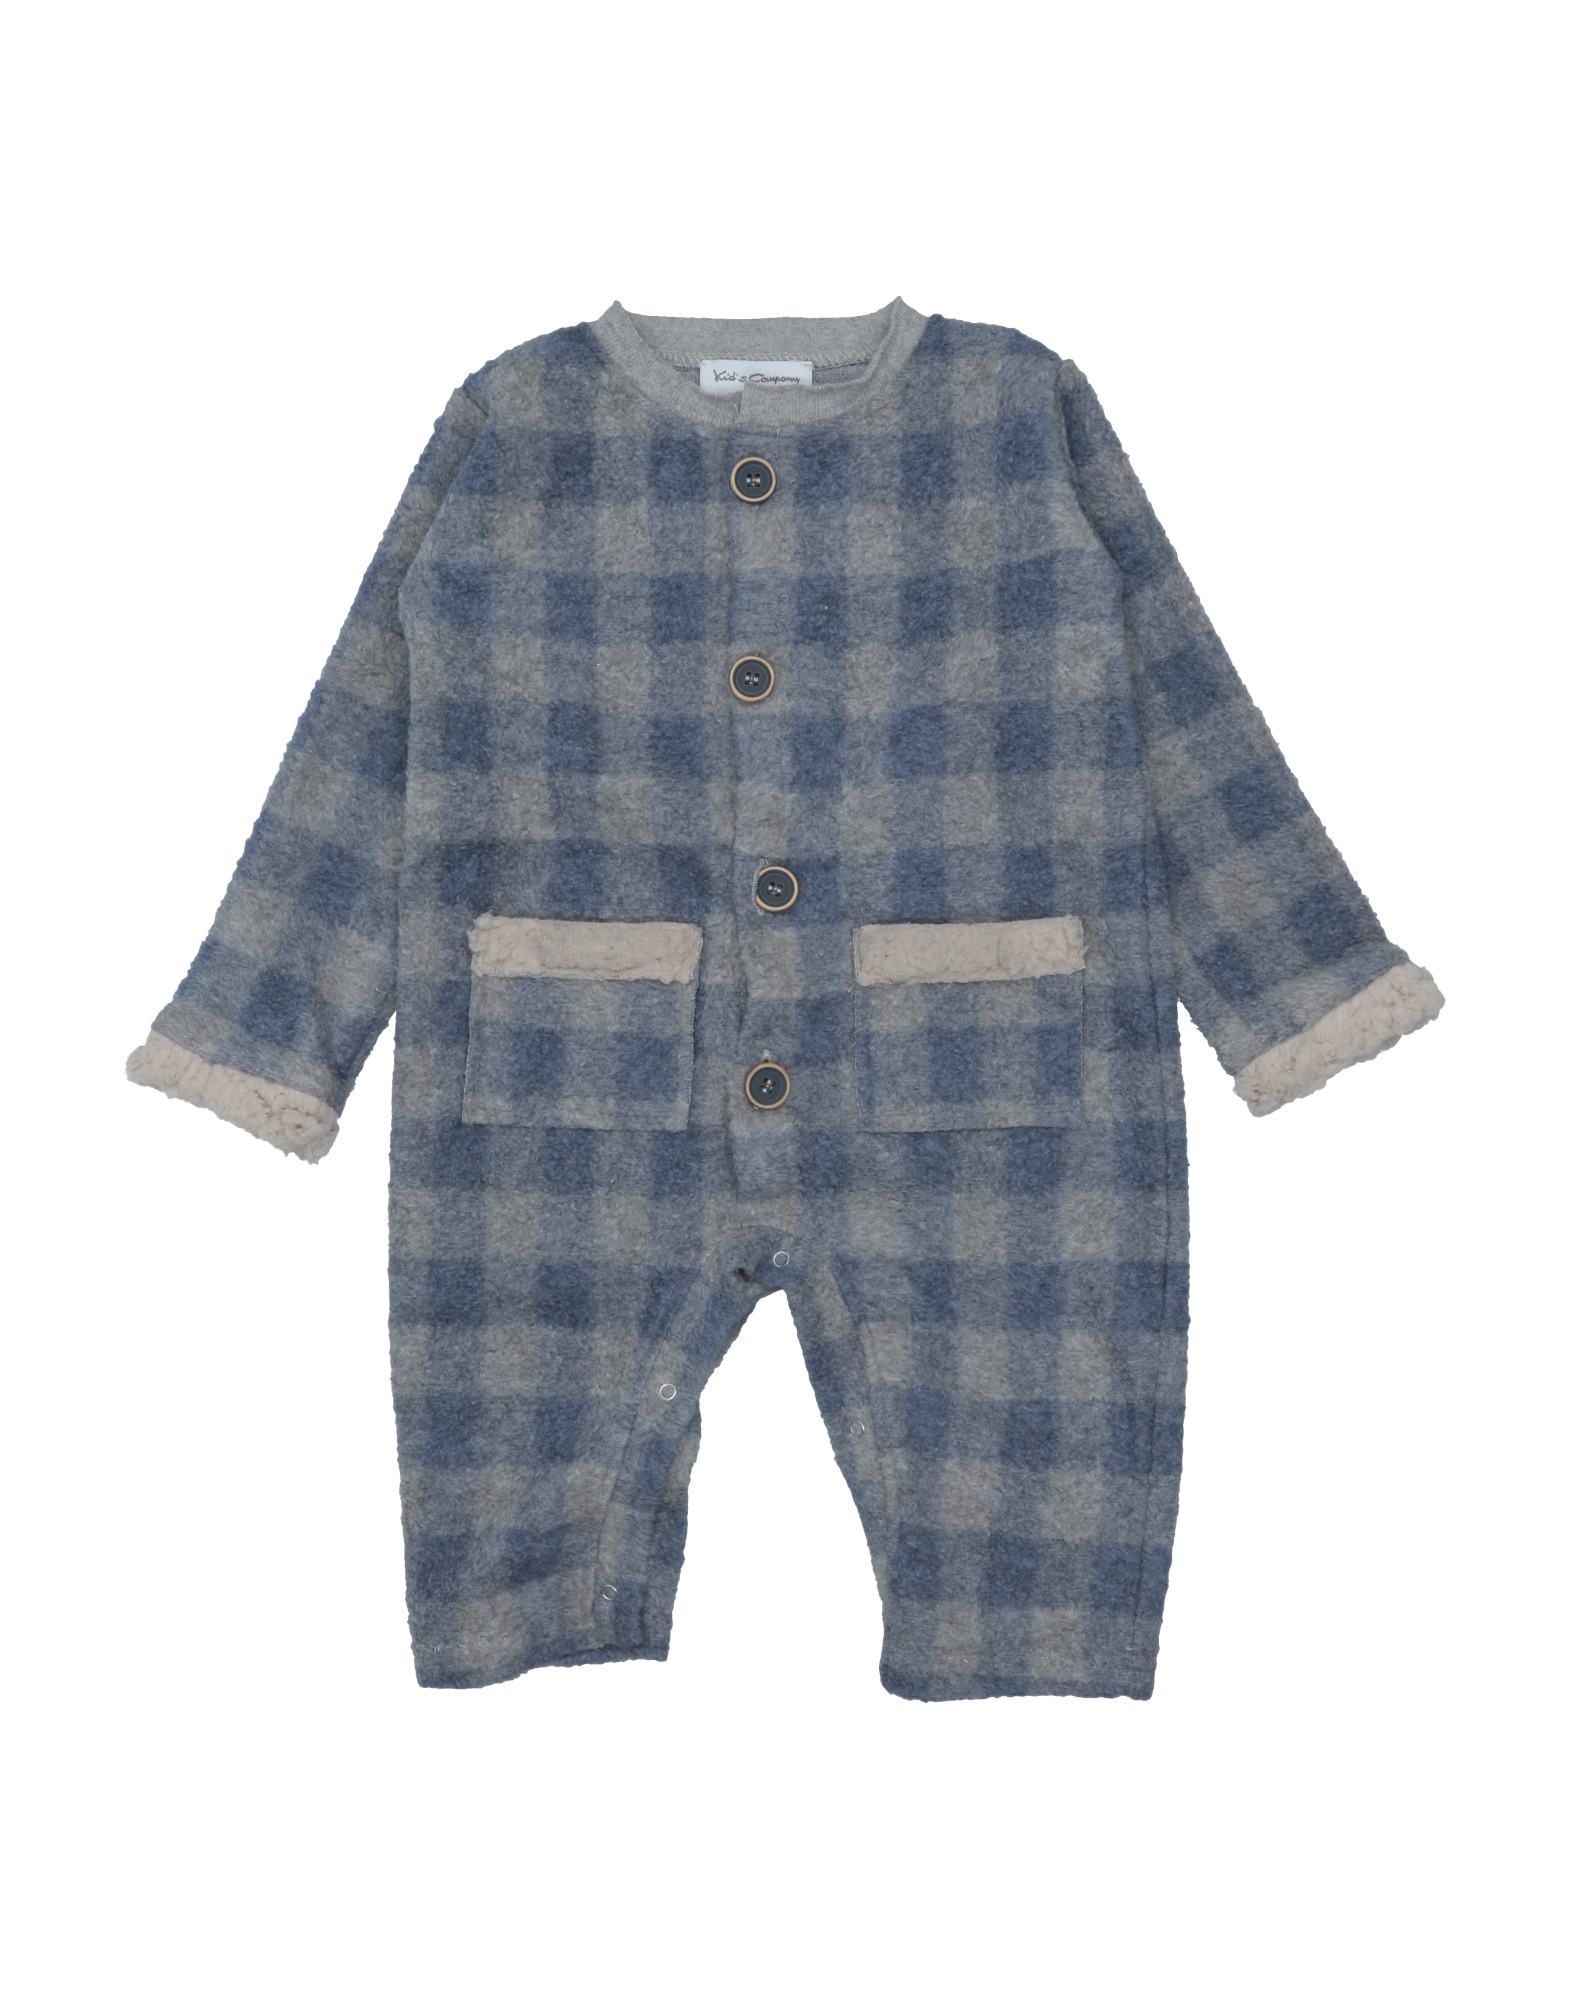 Kid's Company Kids' One-pieces In Slate Blue